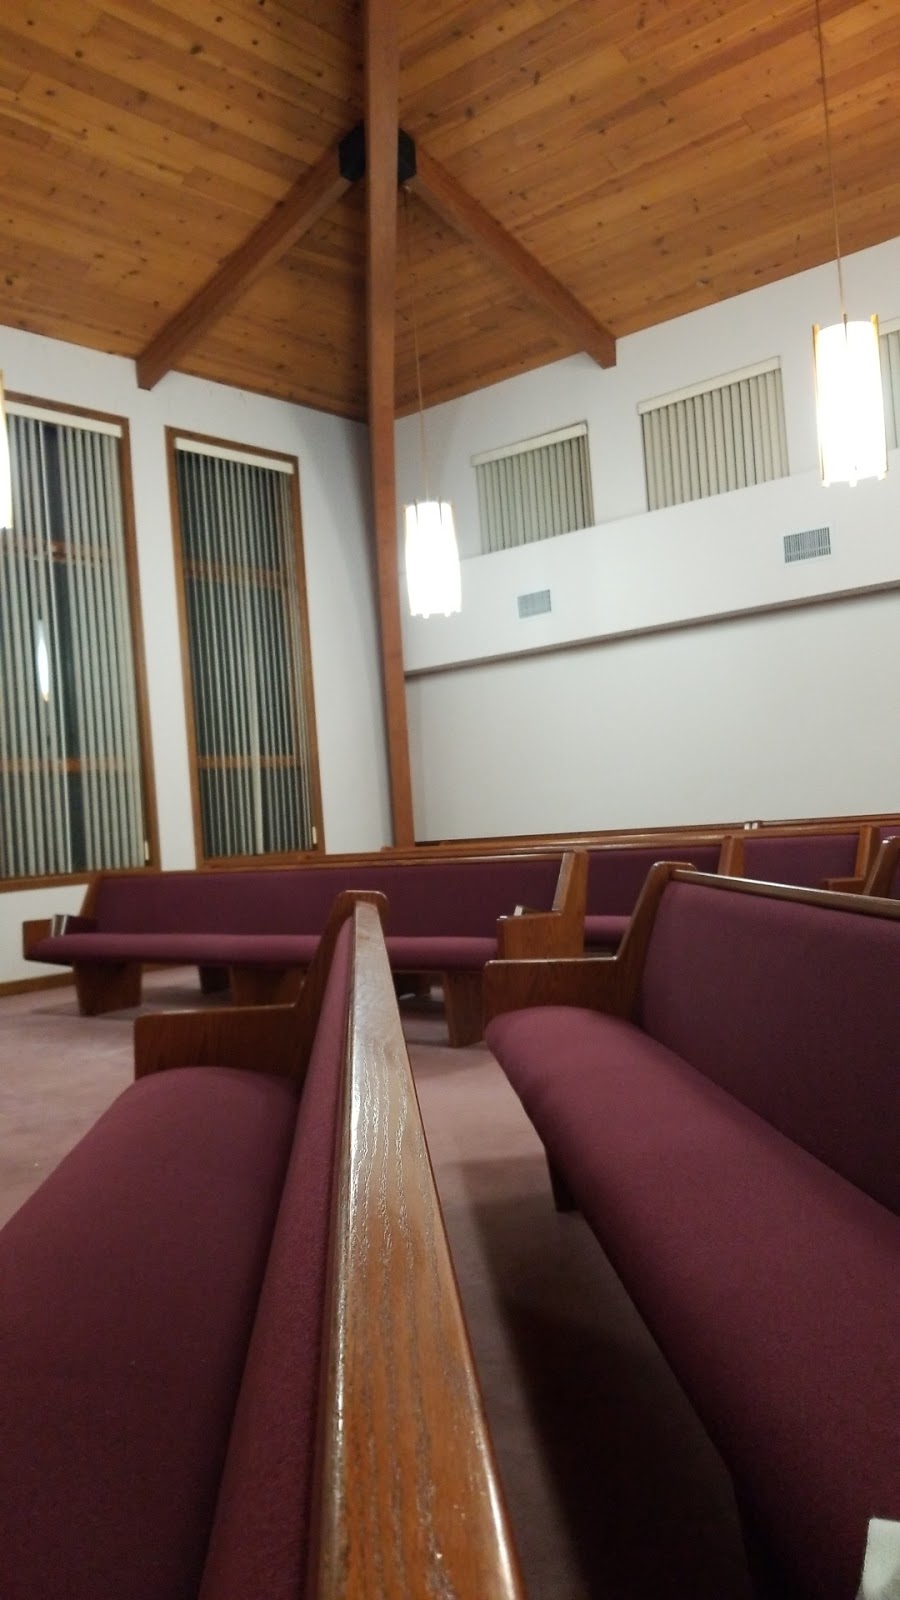 Connecticut Valley Seventh-day Adventist Church | 354 Foster Rd, South Windsor, CT 06074 | Phone: (860) 644-6119